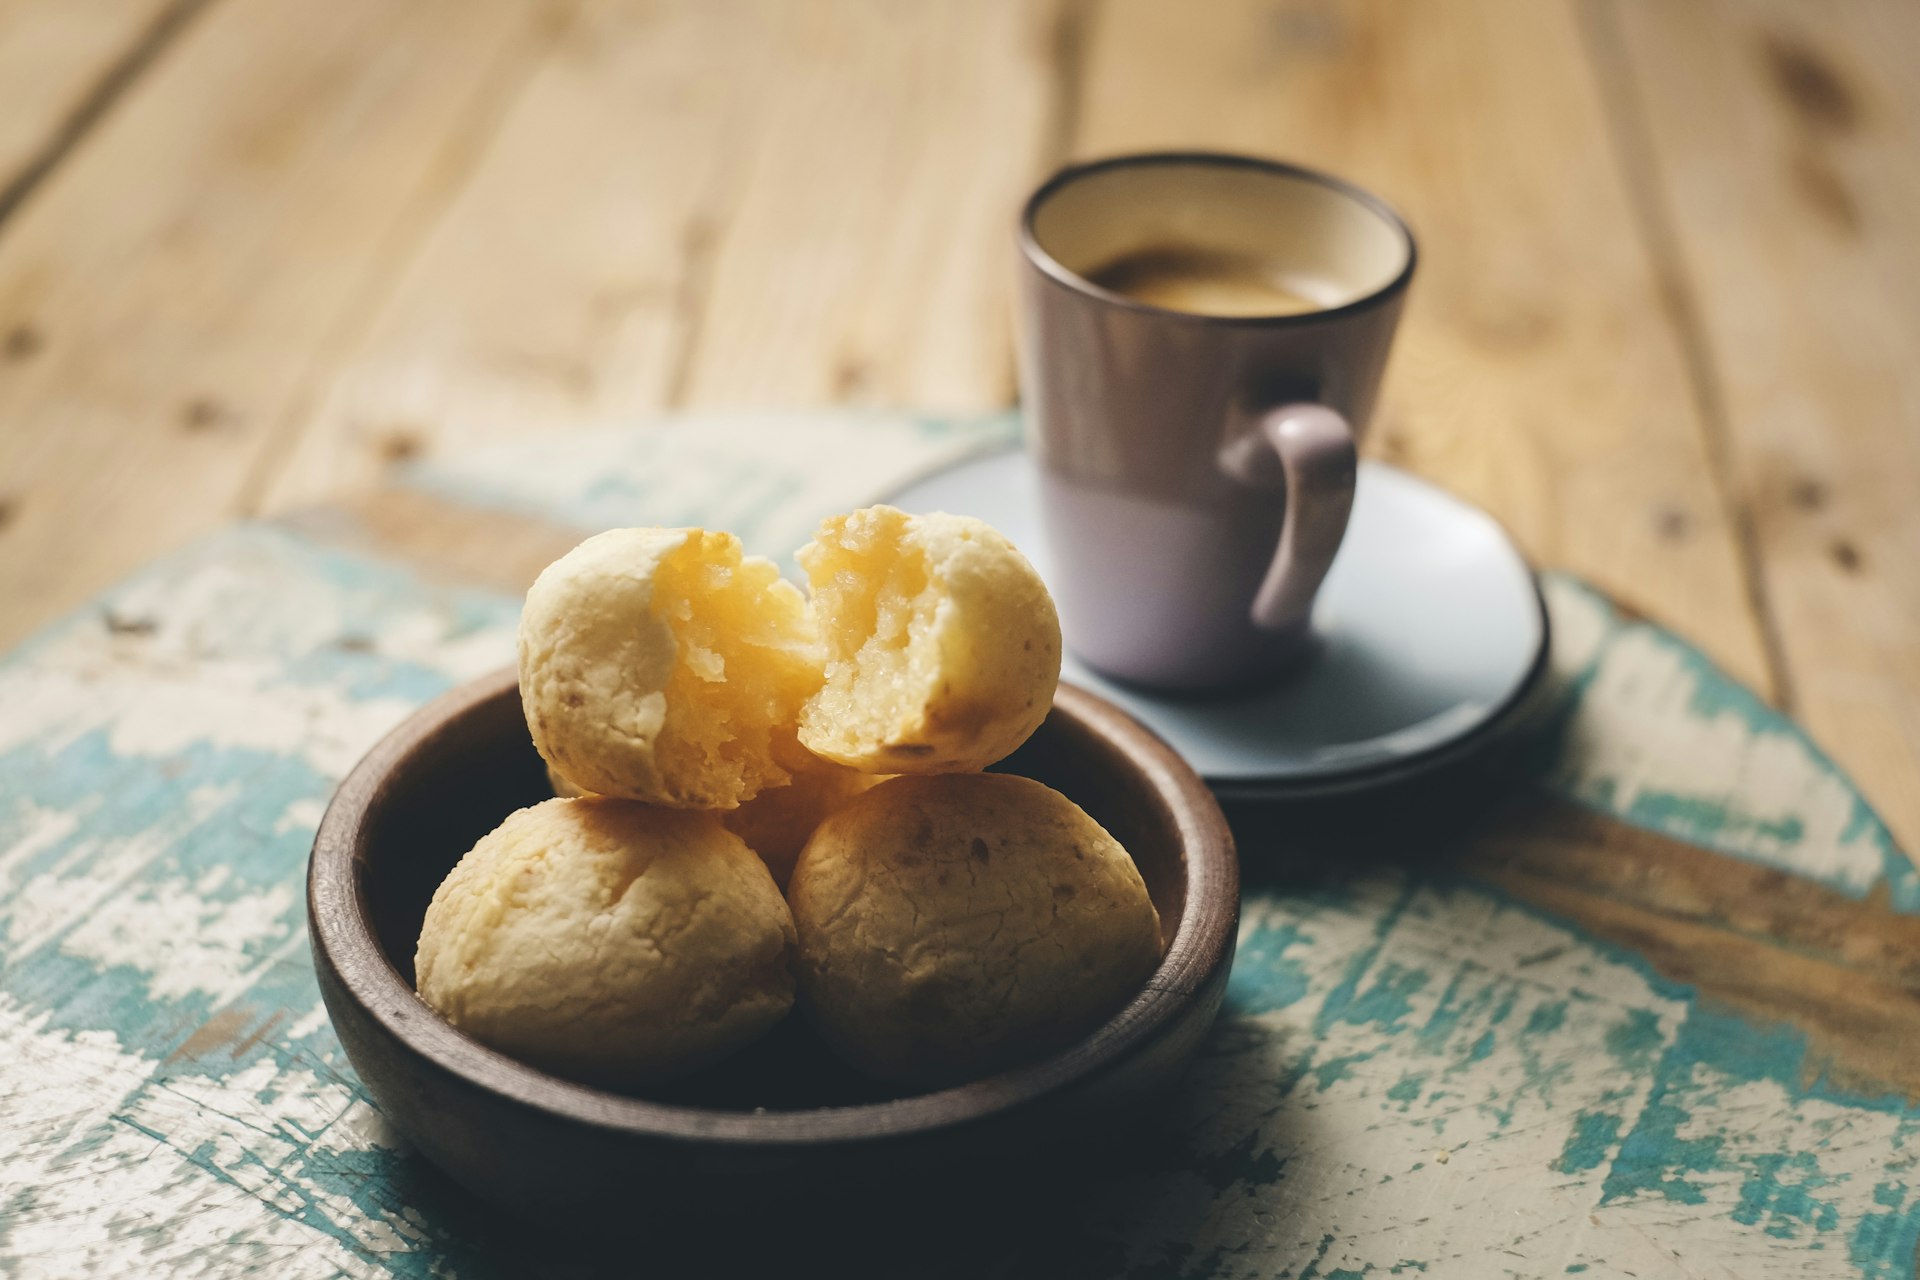 Bowl of pão de queijo (cheese bread) and a cup of coffee in Brazil